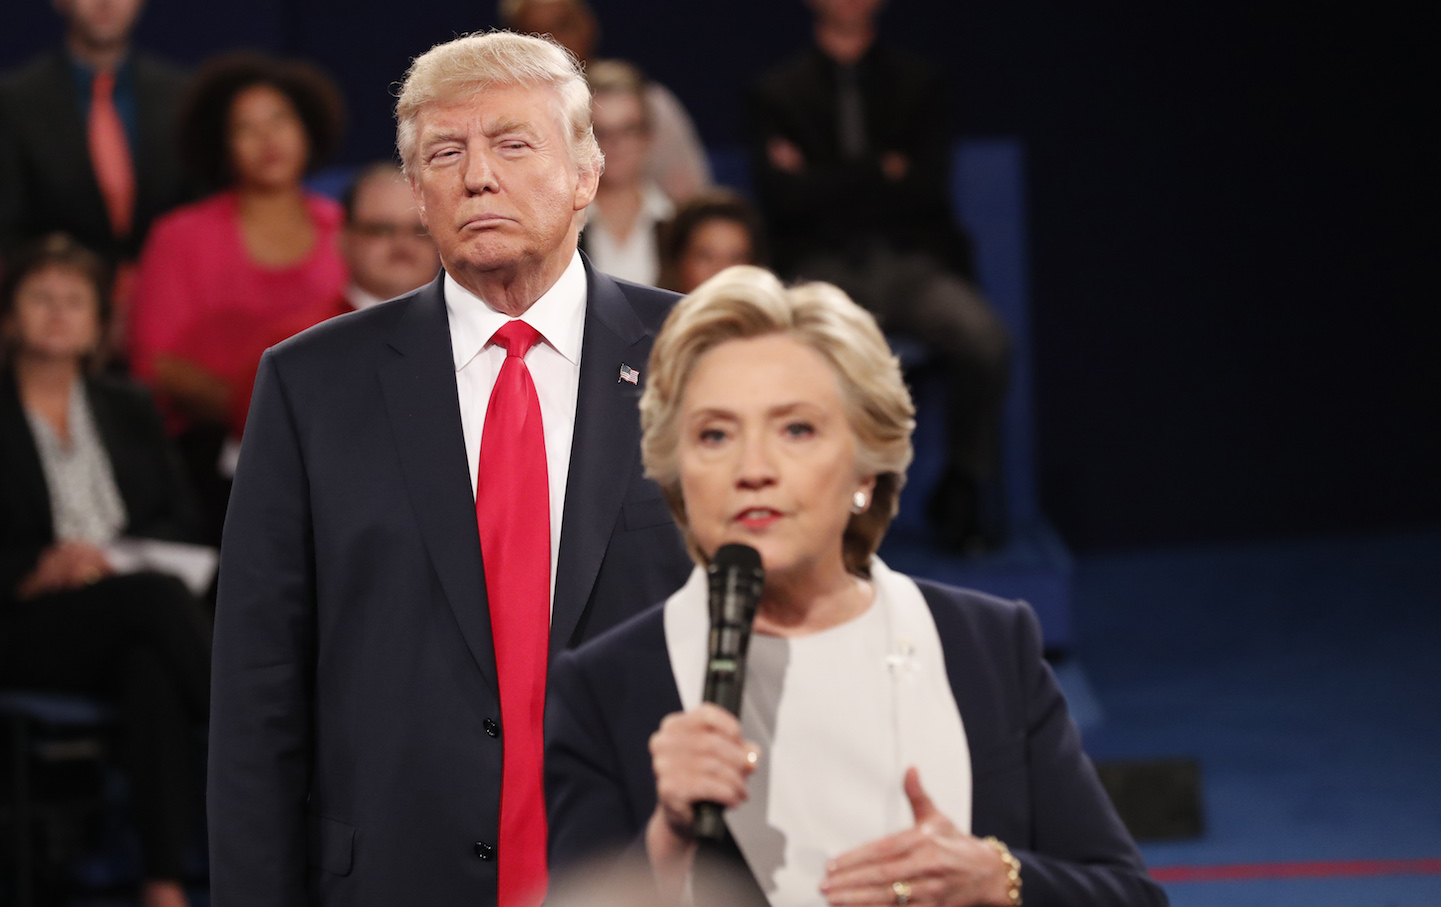 Trump Stalks Clinton, Creepily—but He’ll Never Catch Her